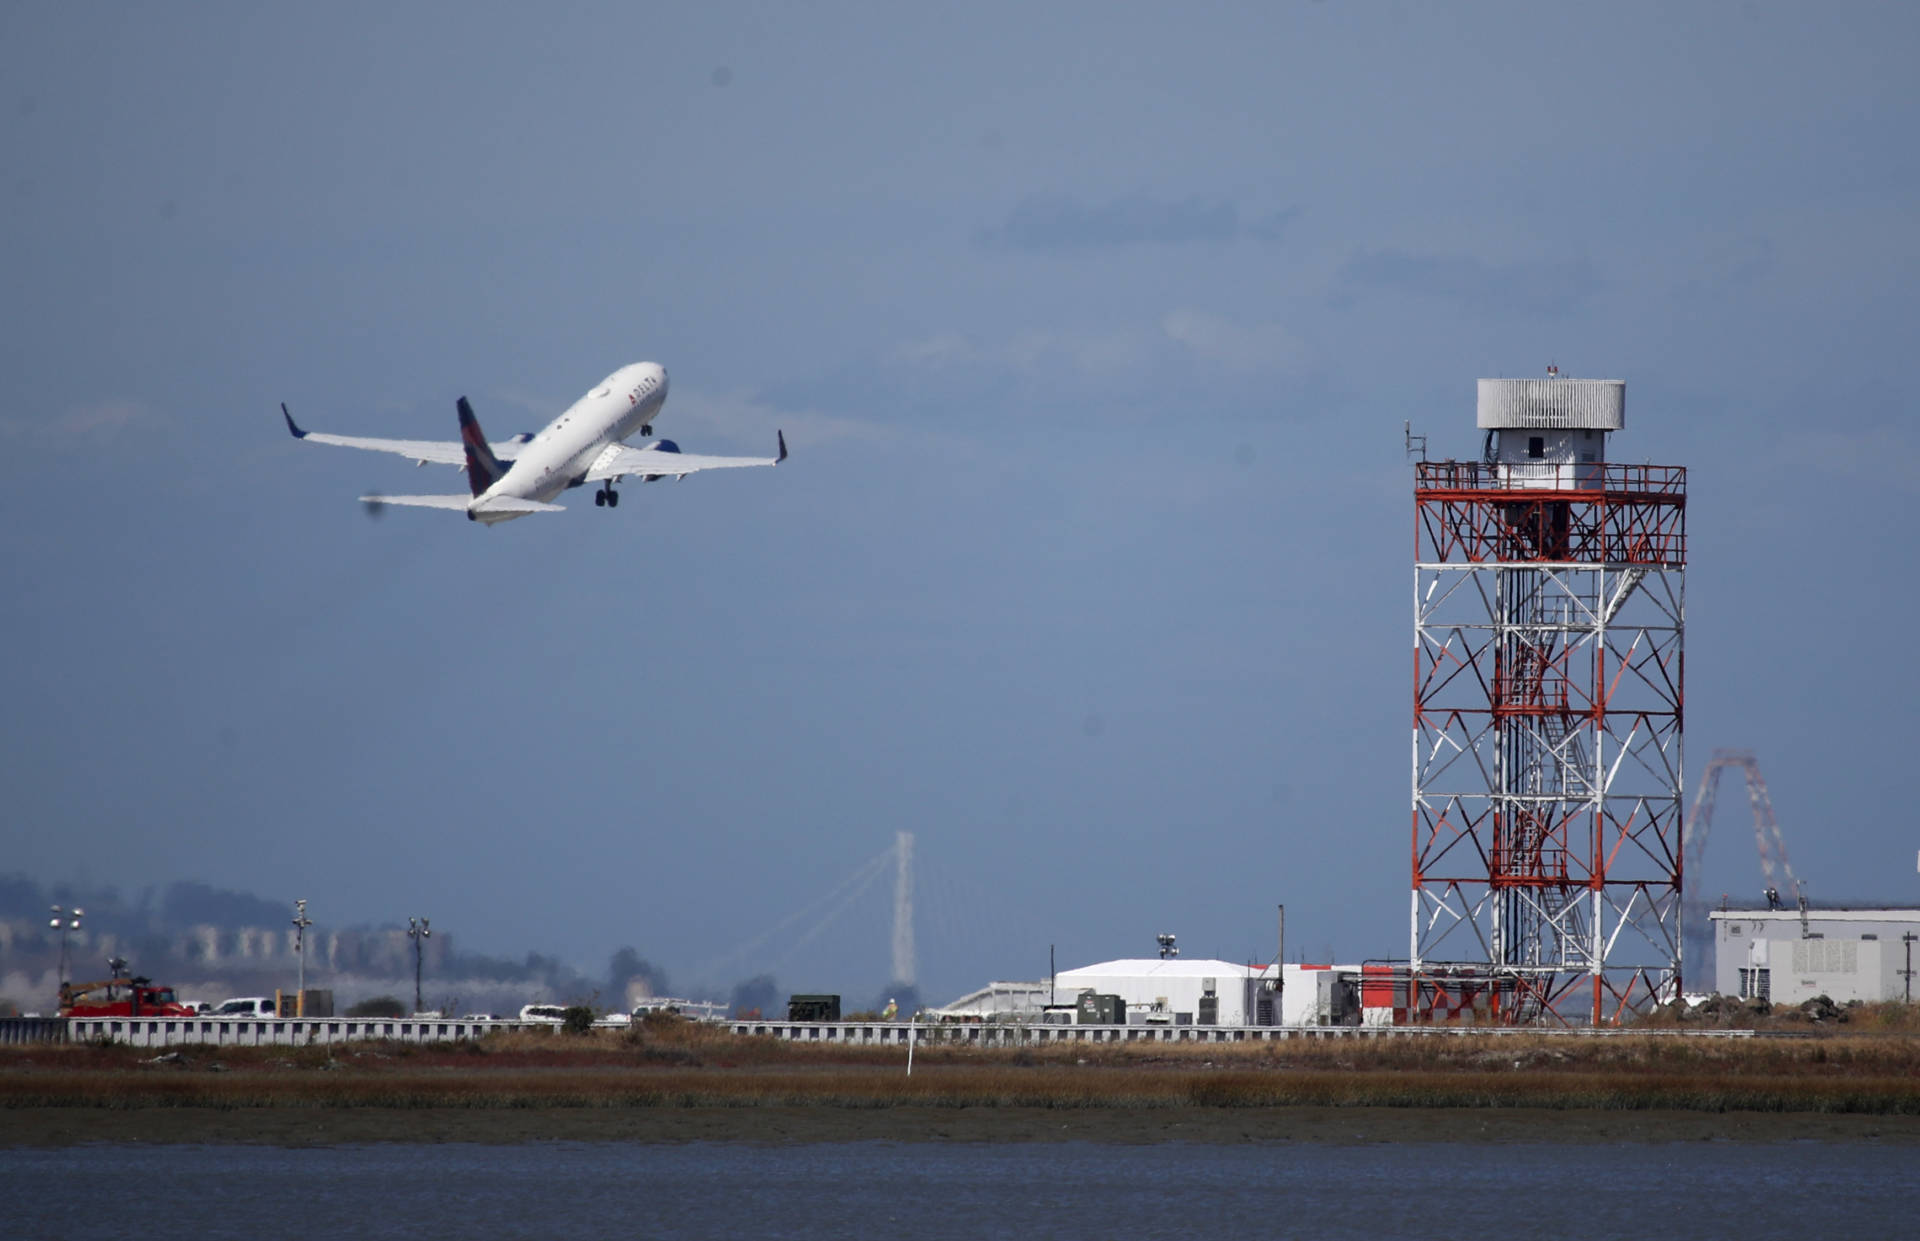 A plane takes off from San Francisco International Airport on Sept. 9, 2019. Justin Sullivan/Getty Images